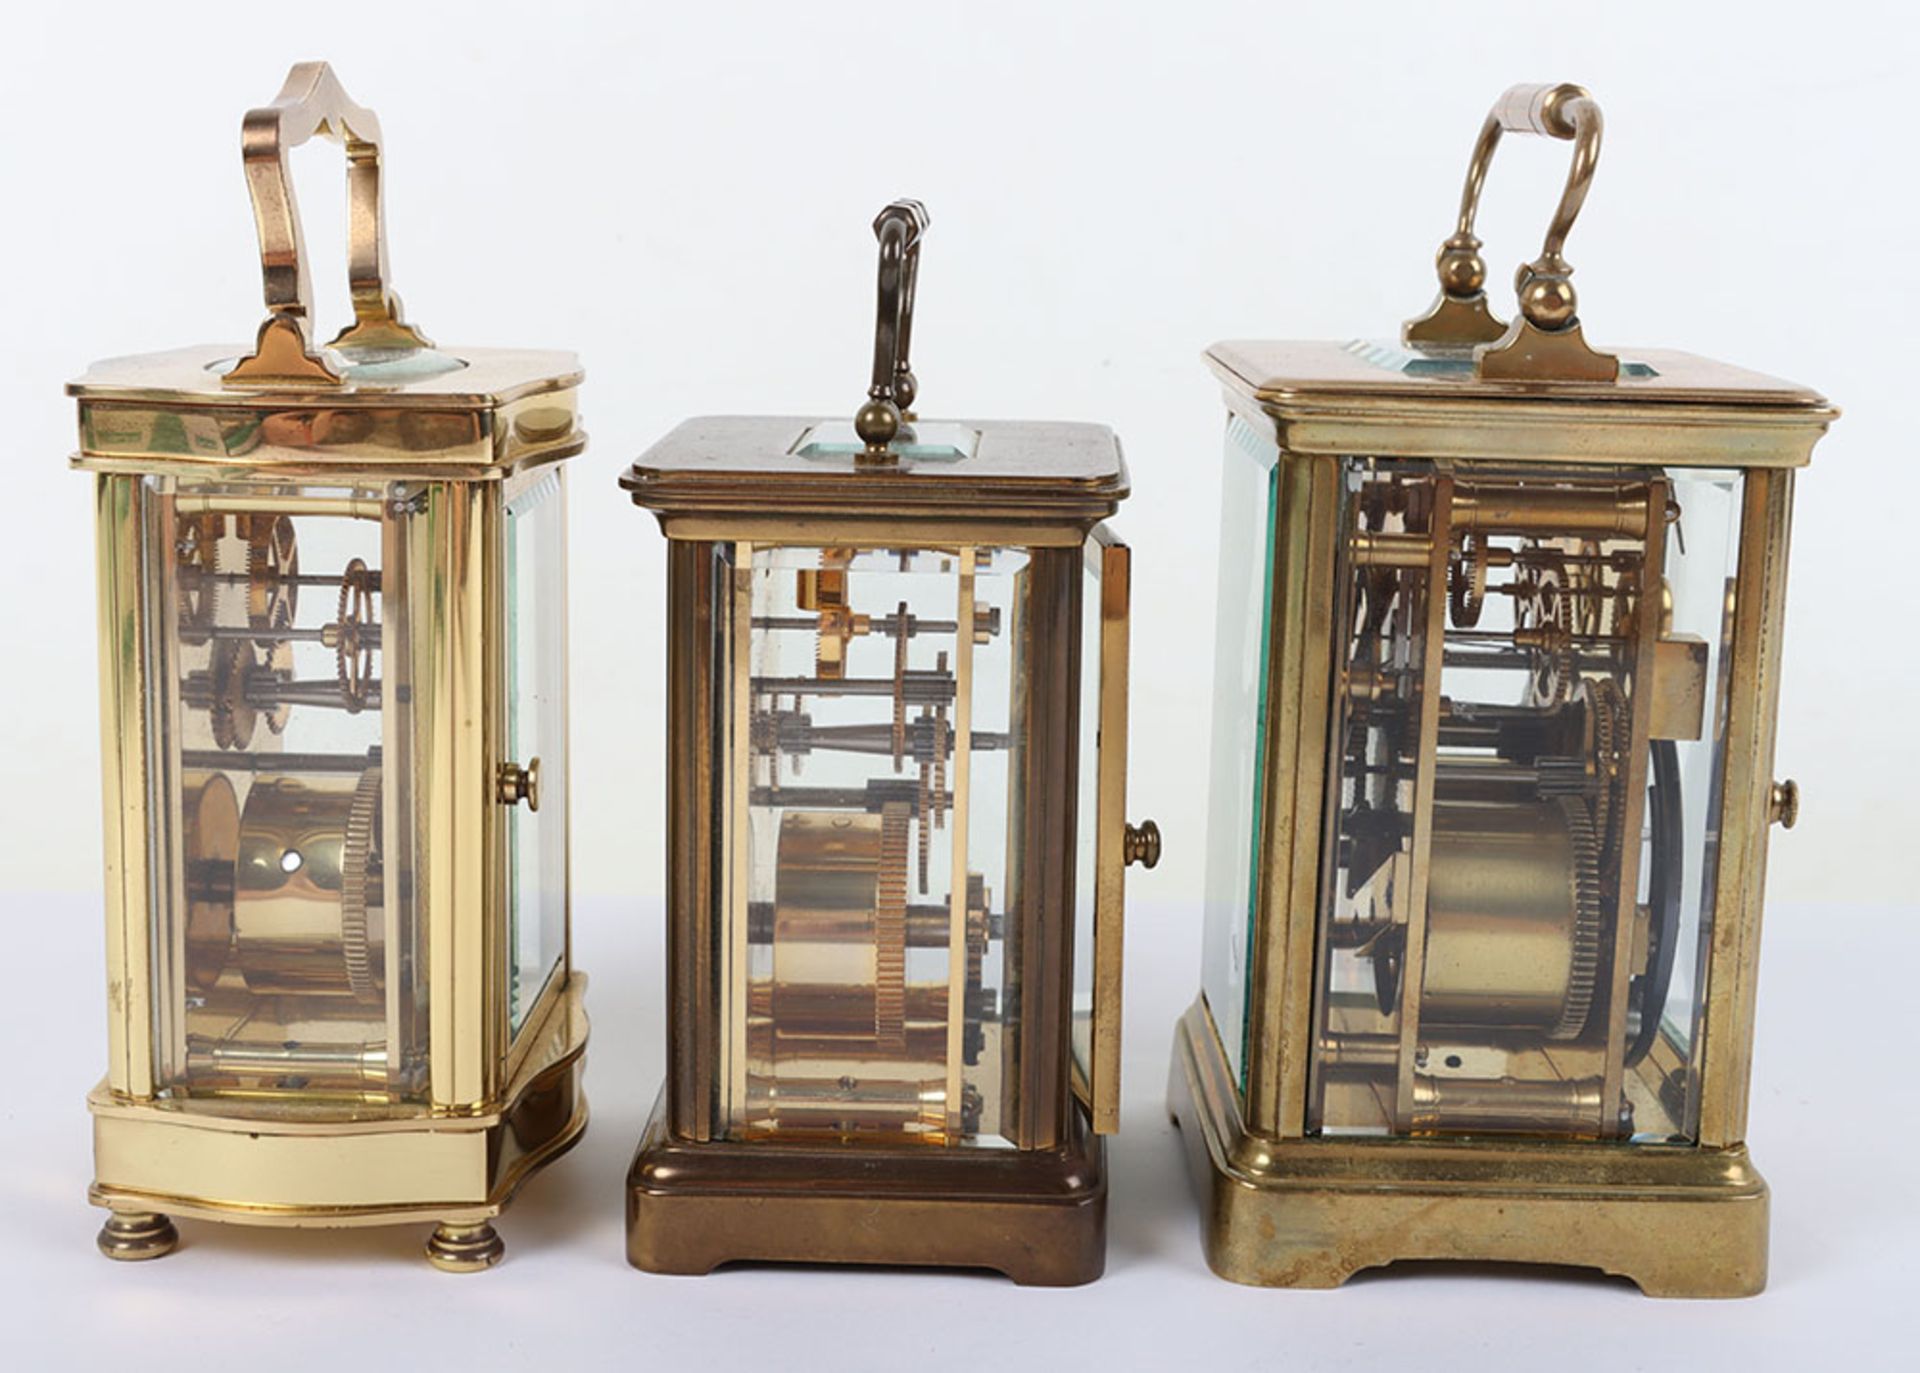 Three 20th century carriage clocks, including Henley, Matthew Norman and one other - Image 3 of 4